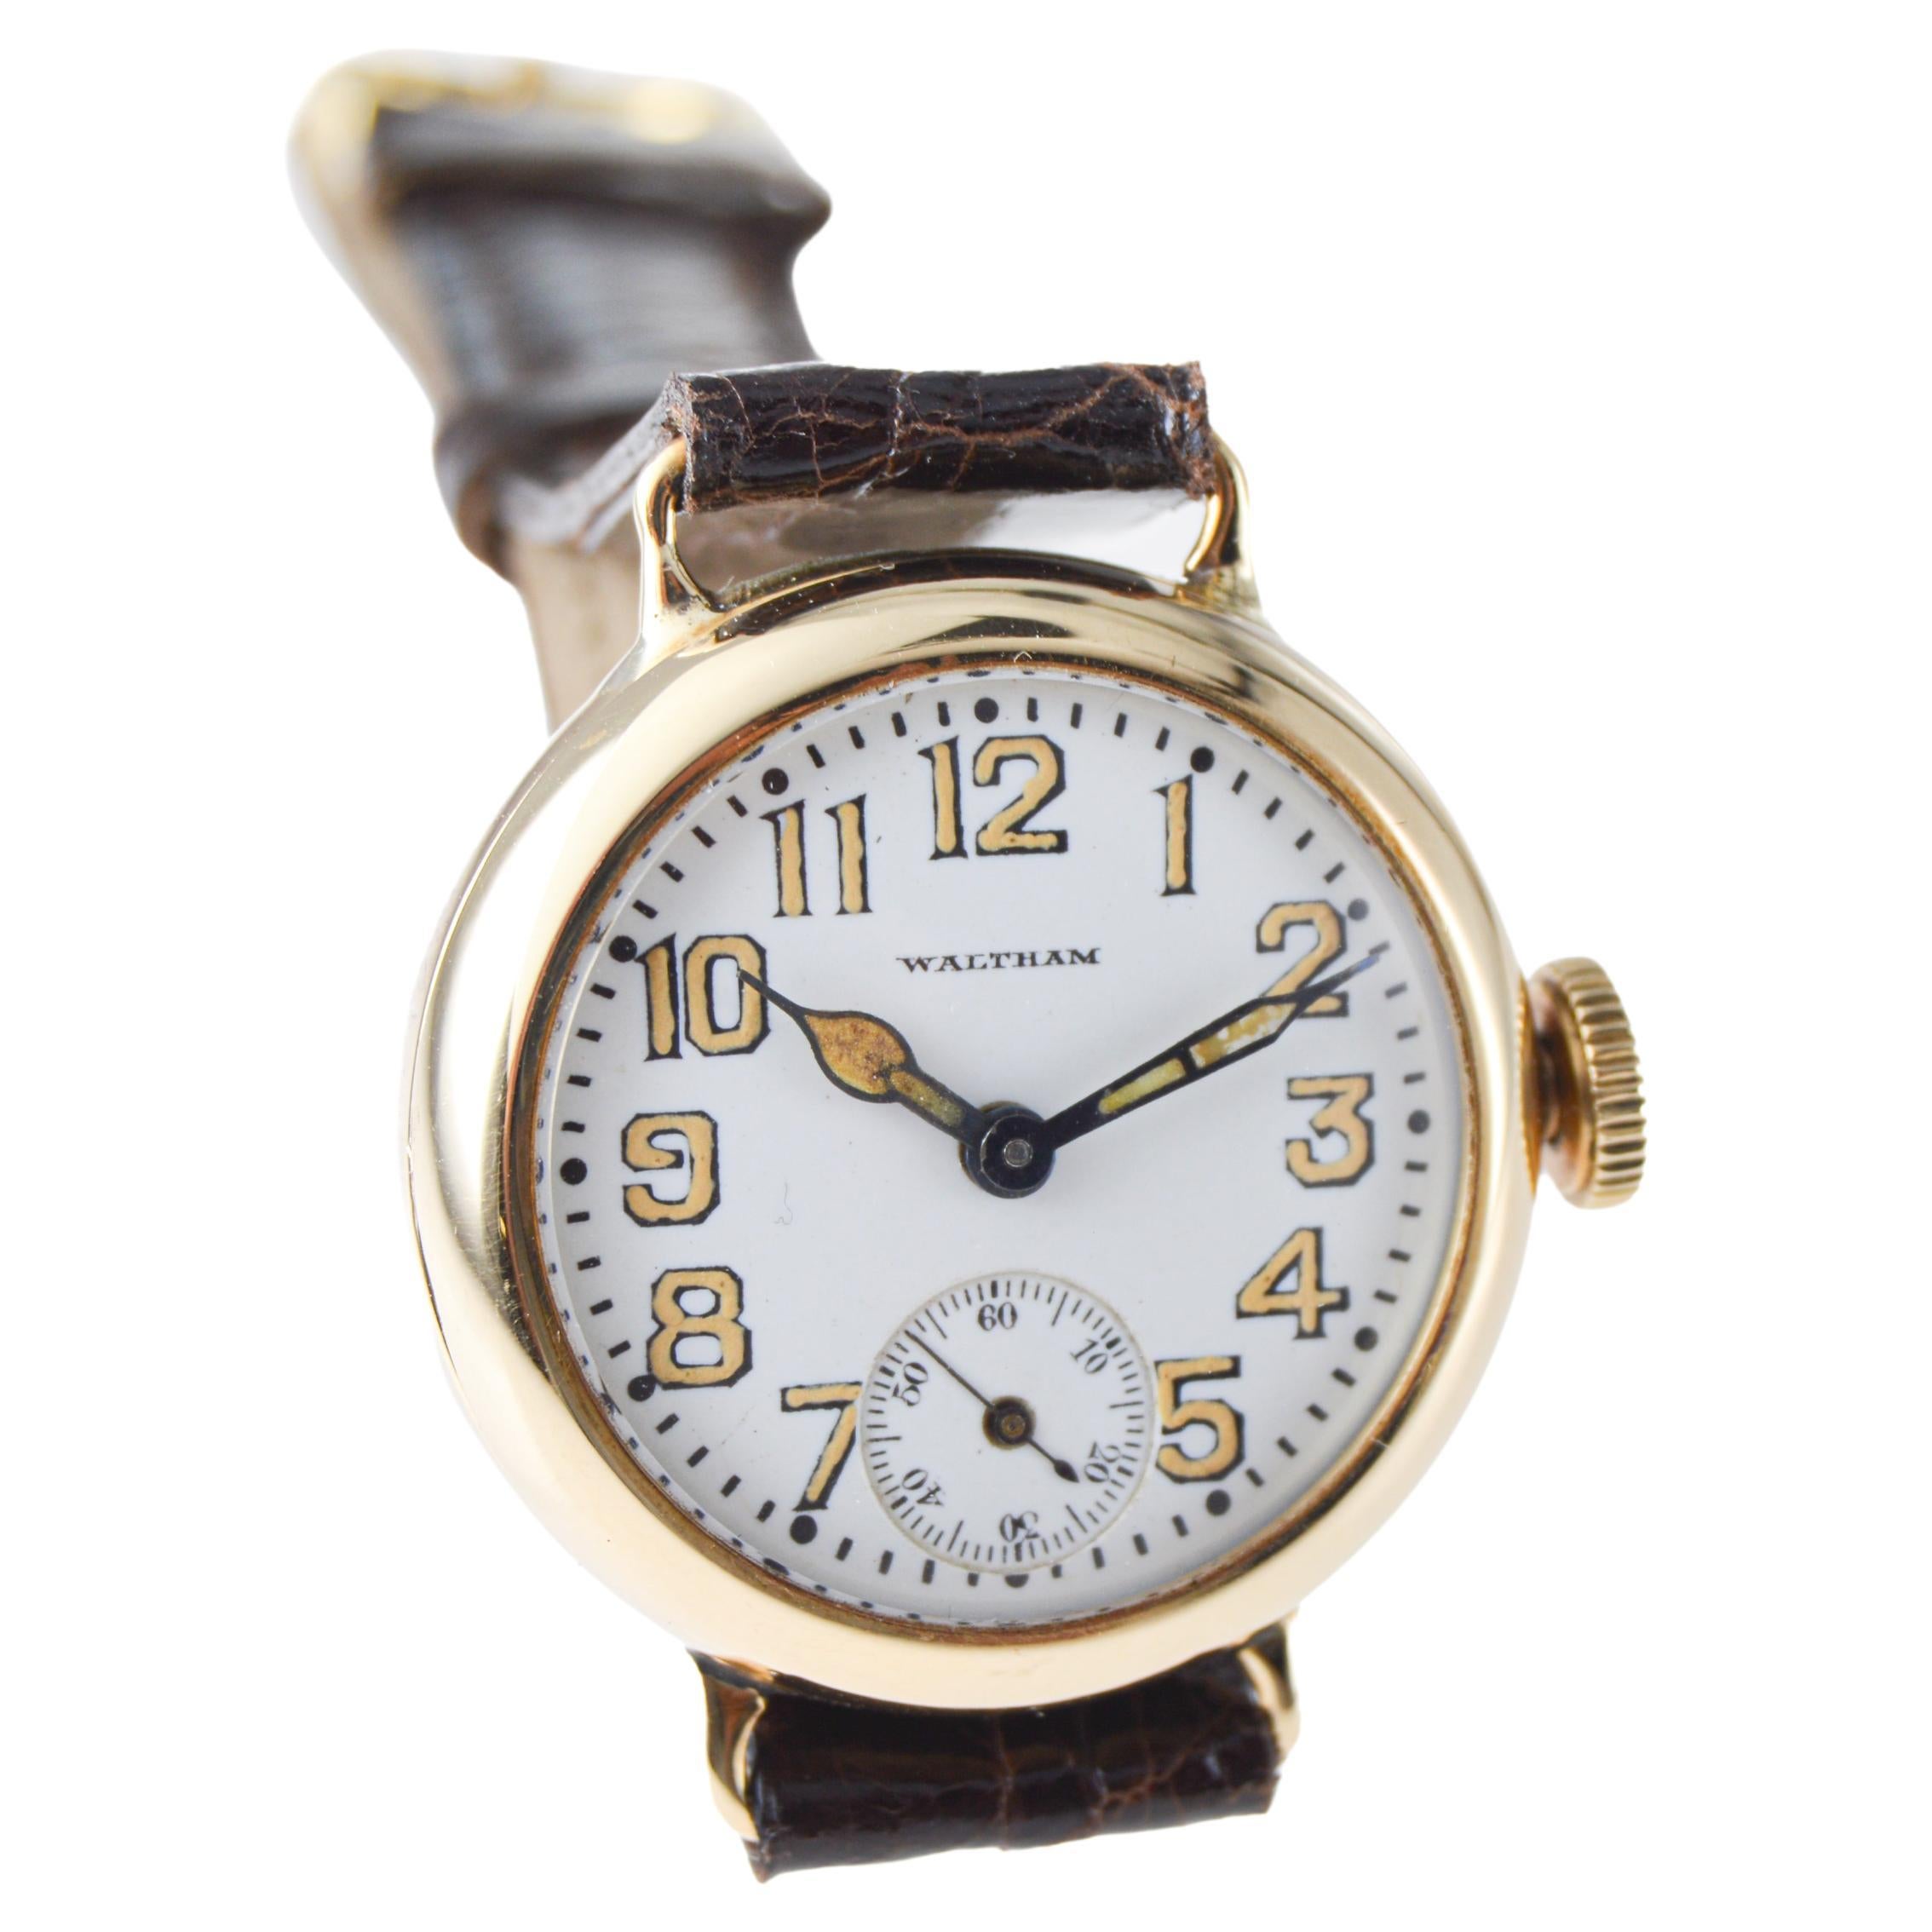 Waltham 14Kt. Gold Campaign Style Watch from 1915 with Original Enamel Dial 1929 For Sale 1